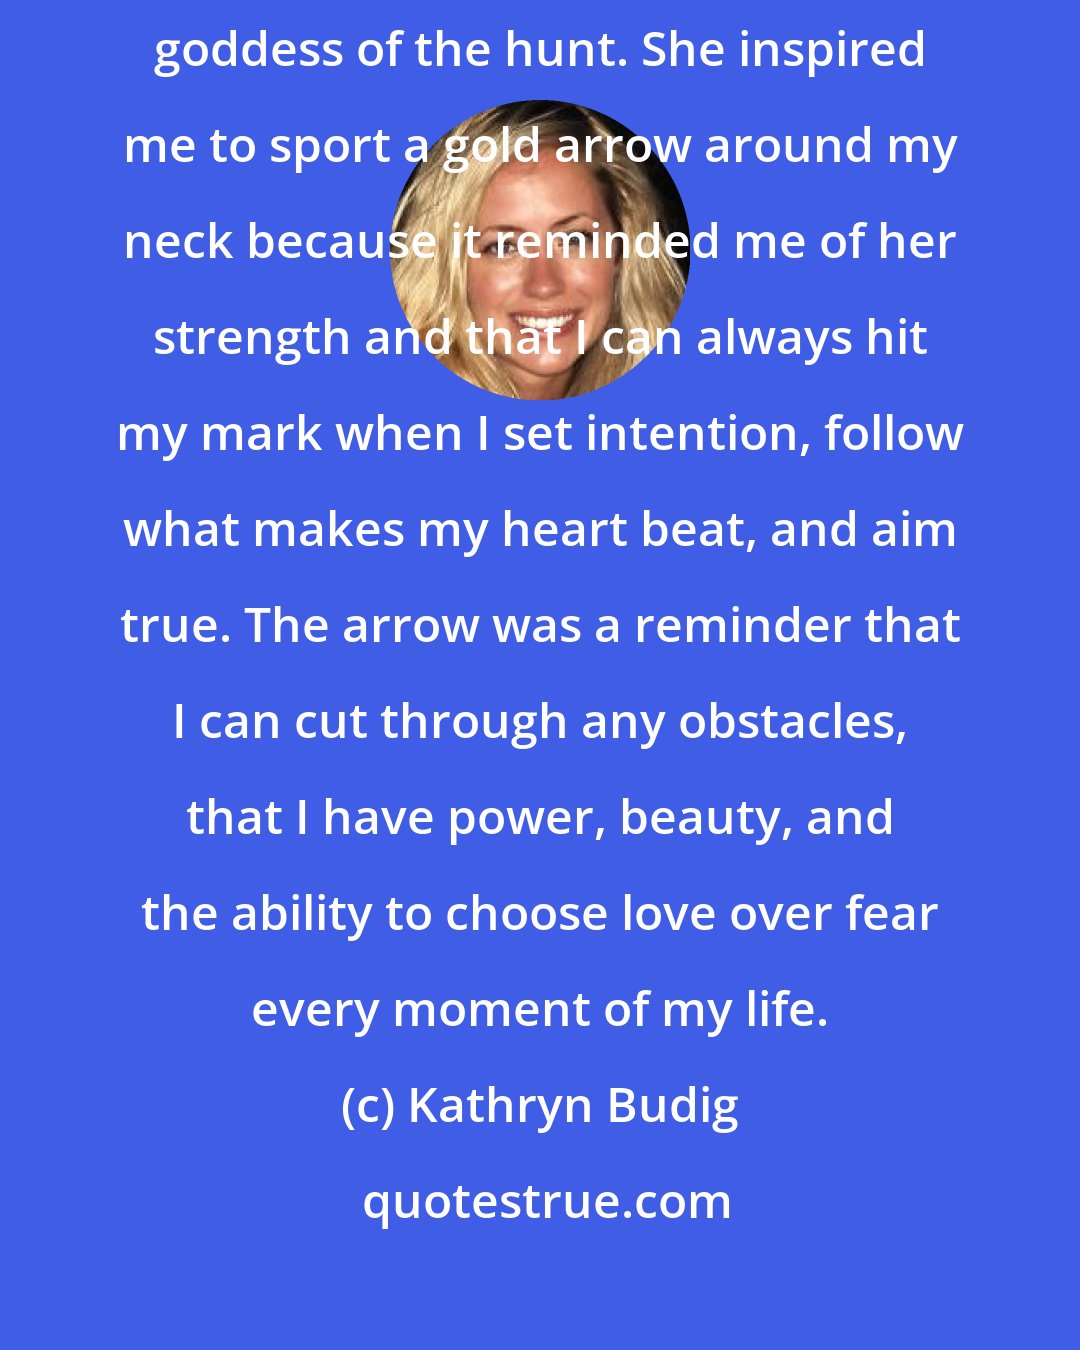 Kathryn Budig: My motto in life is 'aim true'. It came from my love of Artemis, the goddess of the hunt. She inspired me to sport a gold arrow around my neck because it reminded me of her strength and that I can always hit my mark when I set intention, follow what makes my heart beat, and aim true. The arrow was a reminder that I can cut through any obstacles, that I have power, beauty, and the ability to choose love over fear every moment of my life.